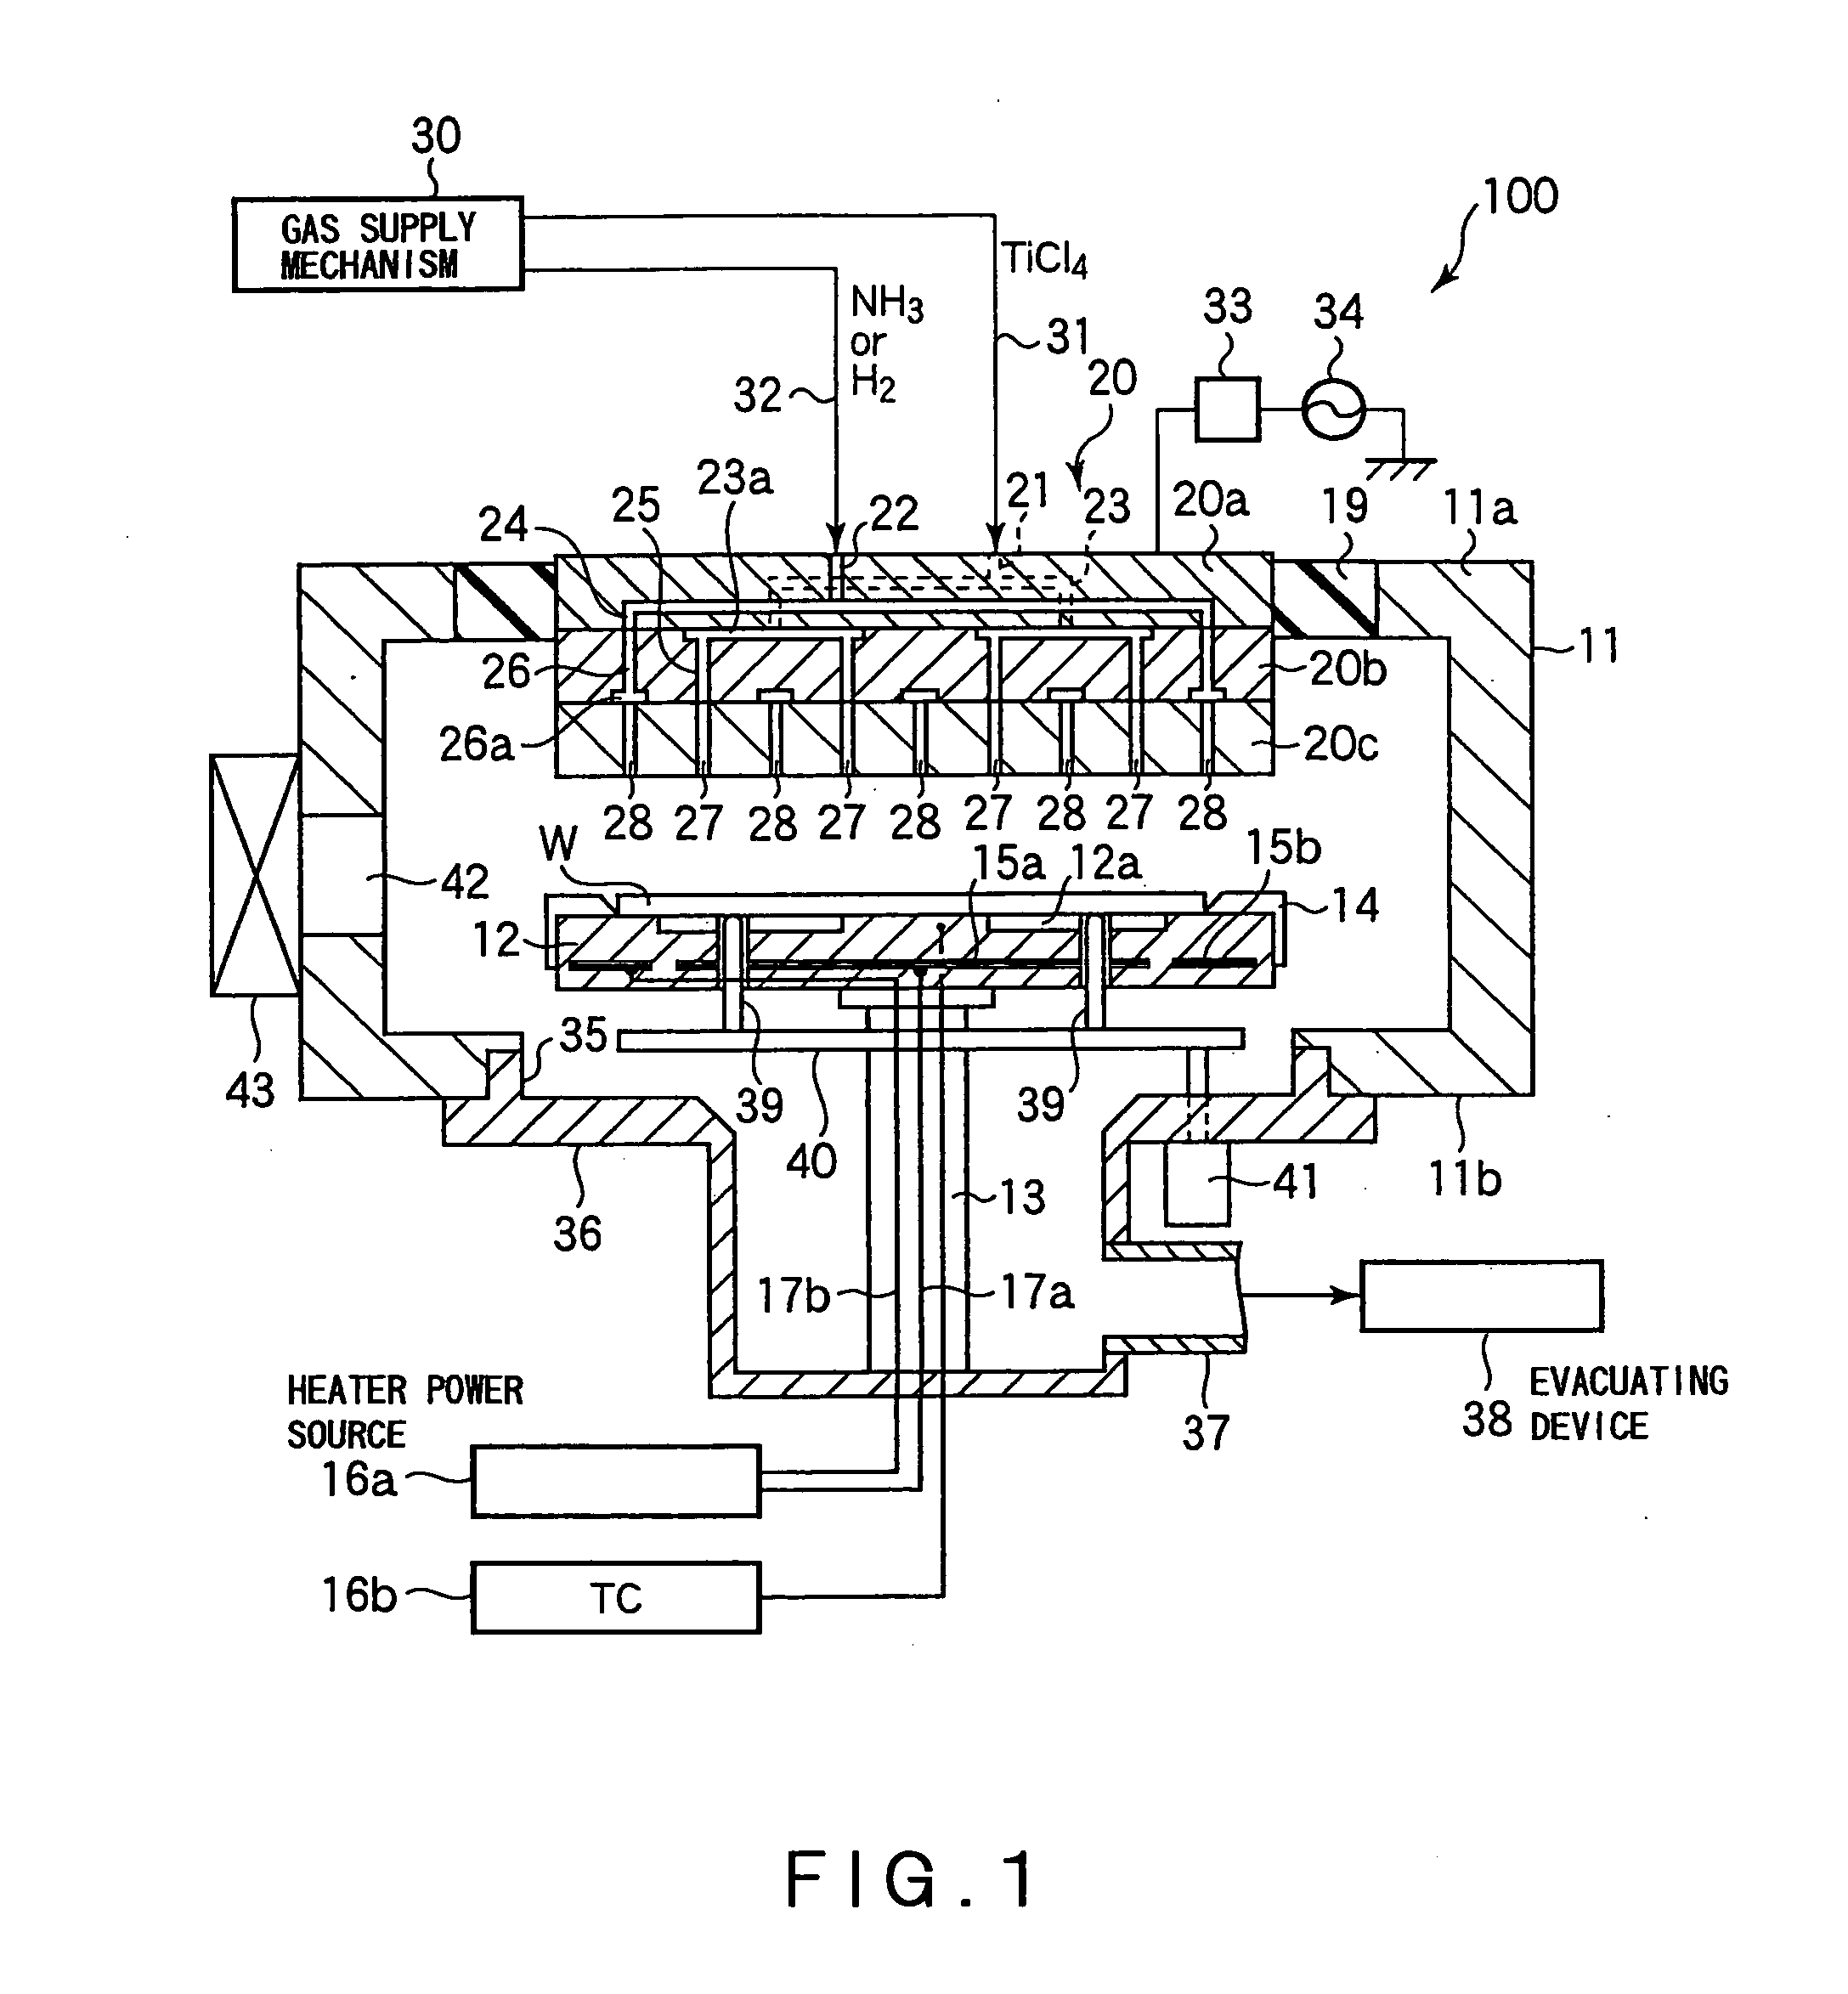 Substrate Processing Apparatus and Substrate Mount Table Used in the Apparatus